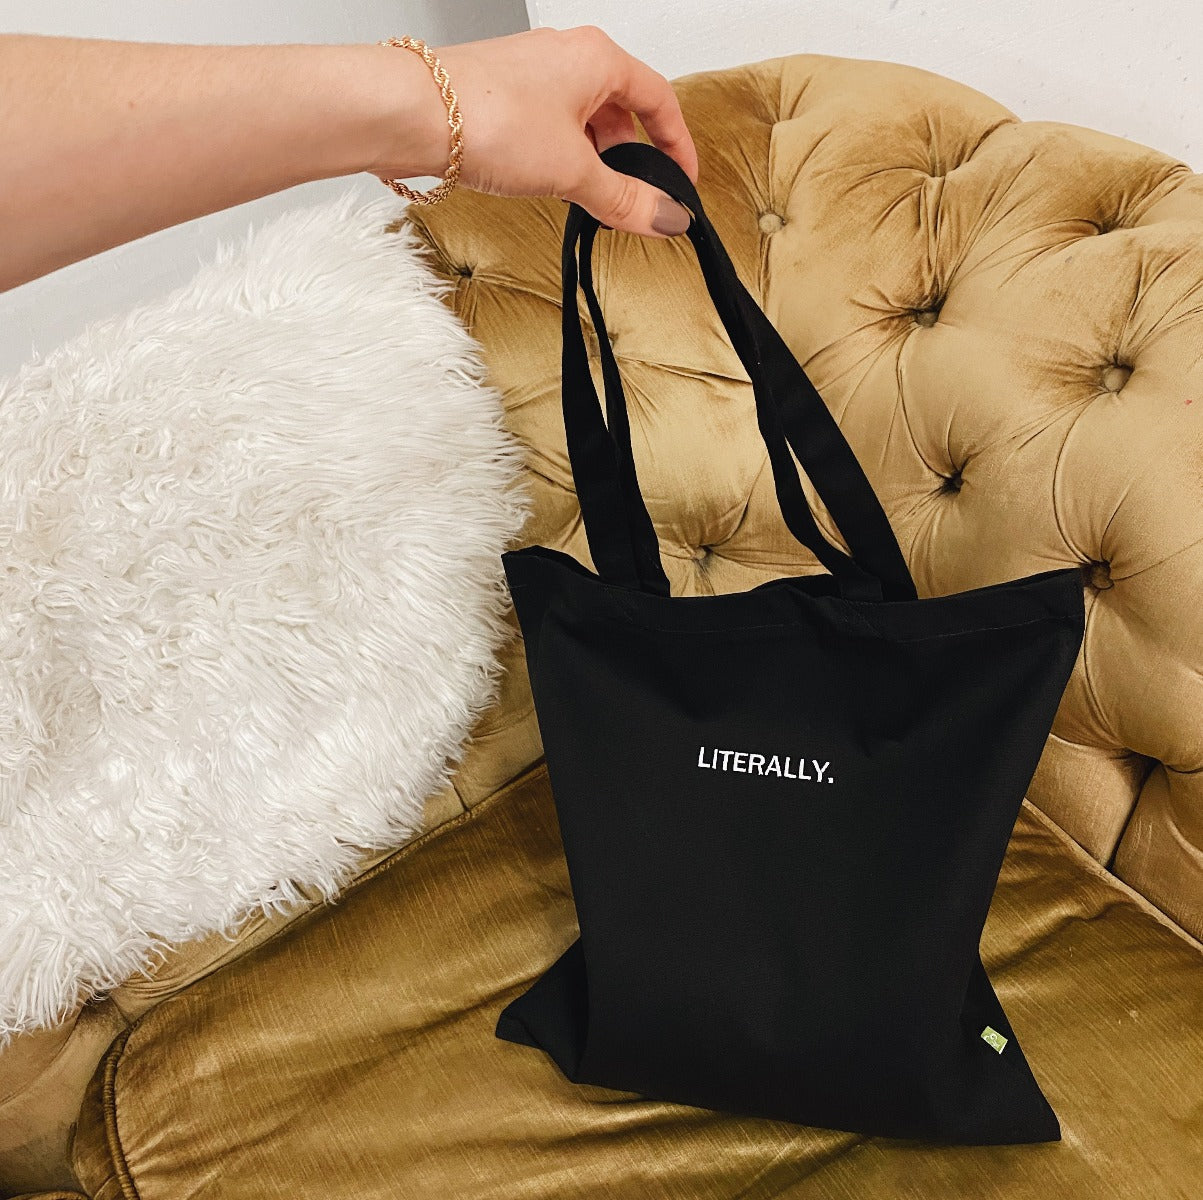 Embroidered Literally Tote Bag